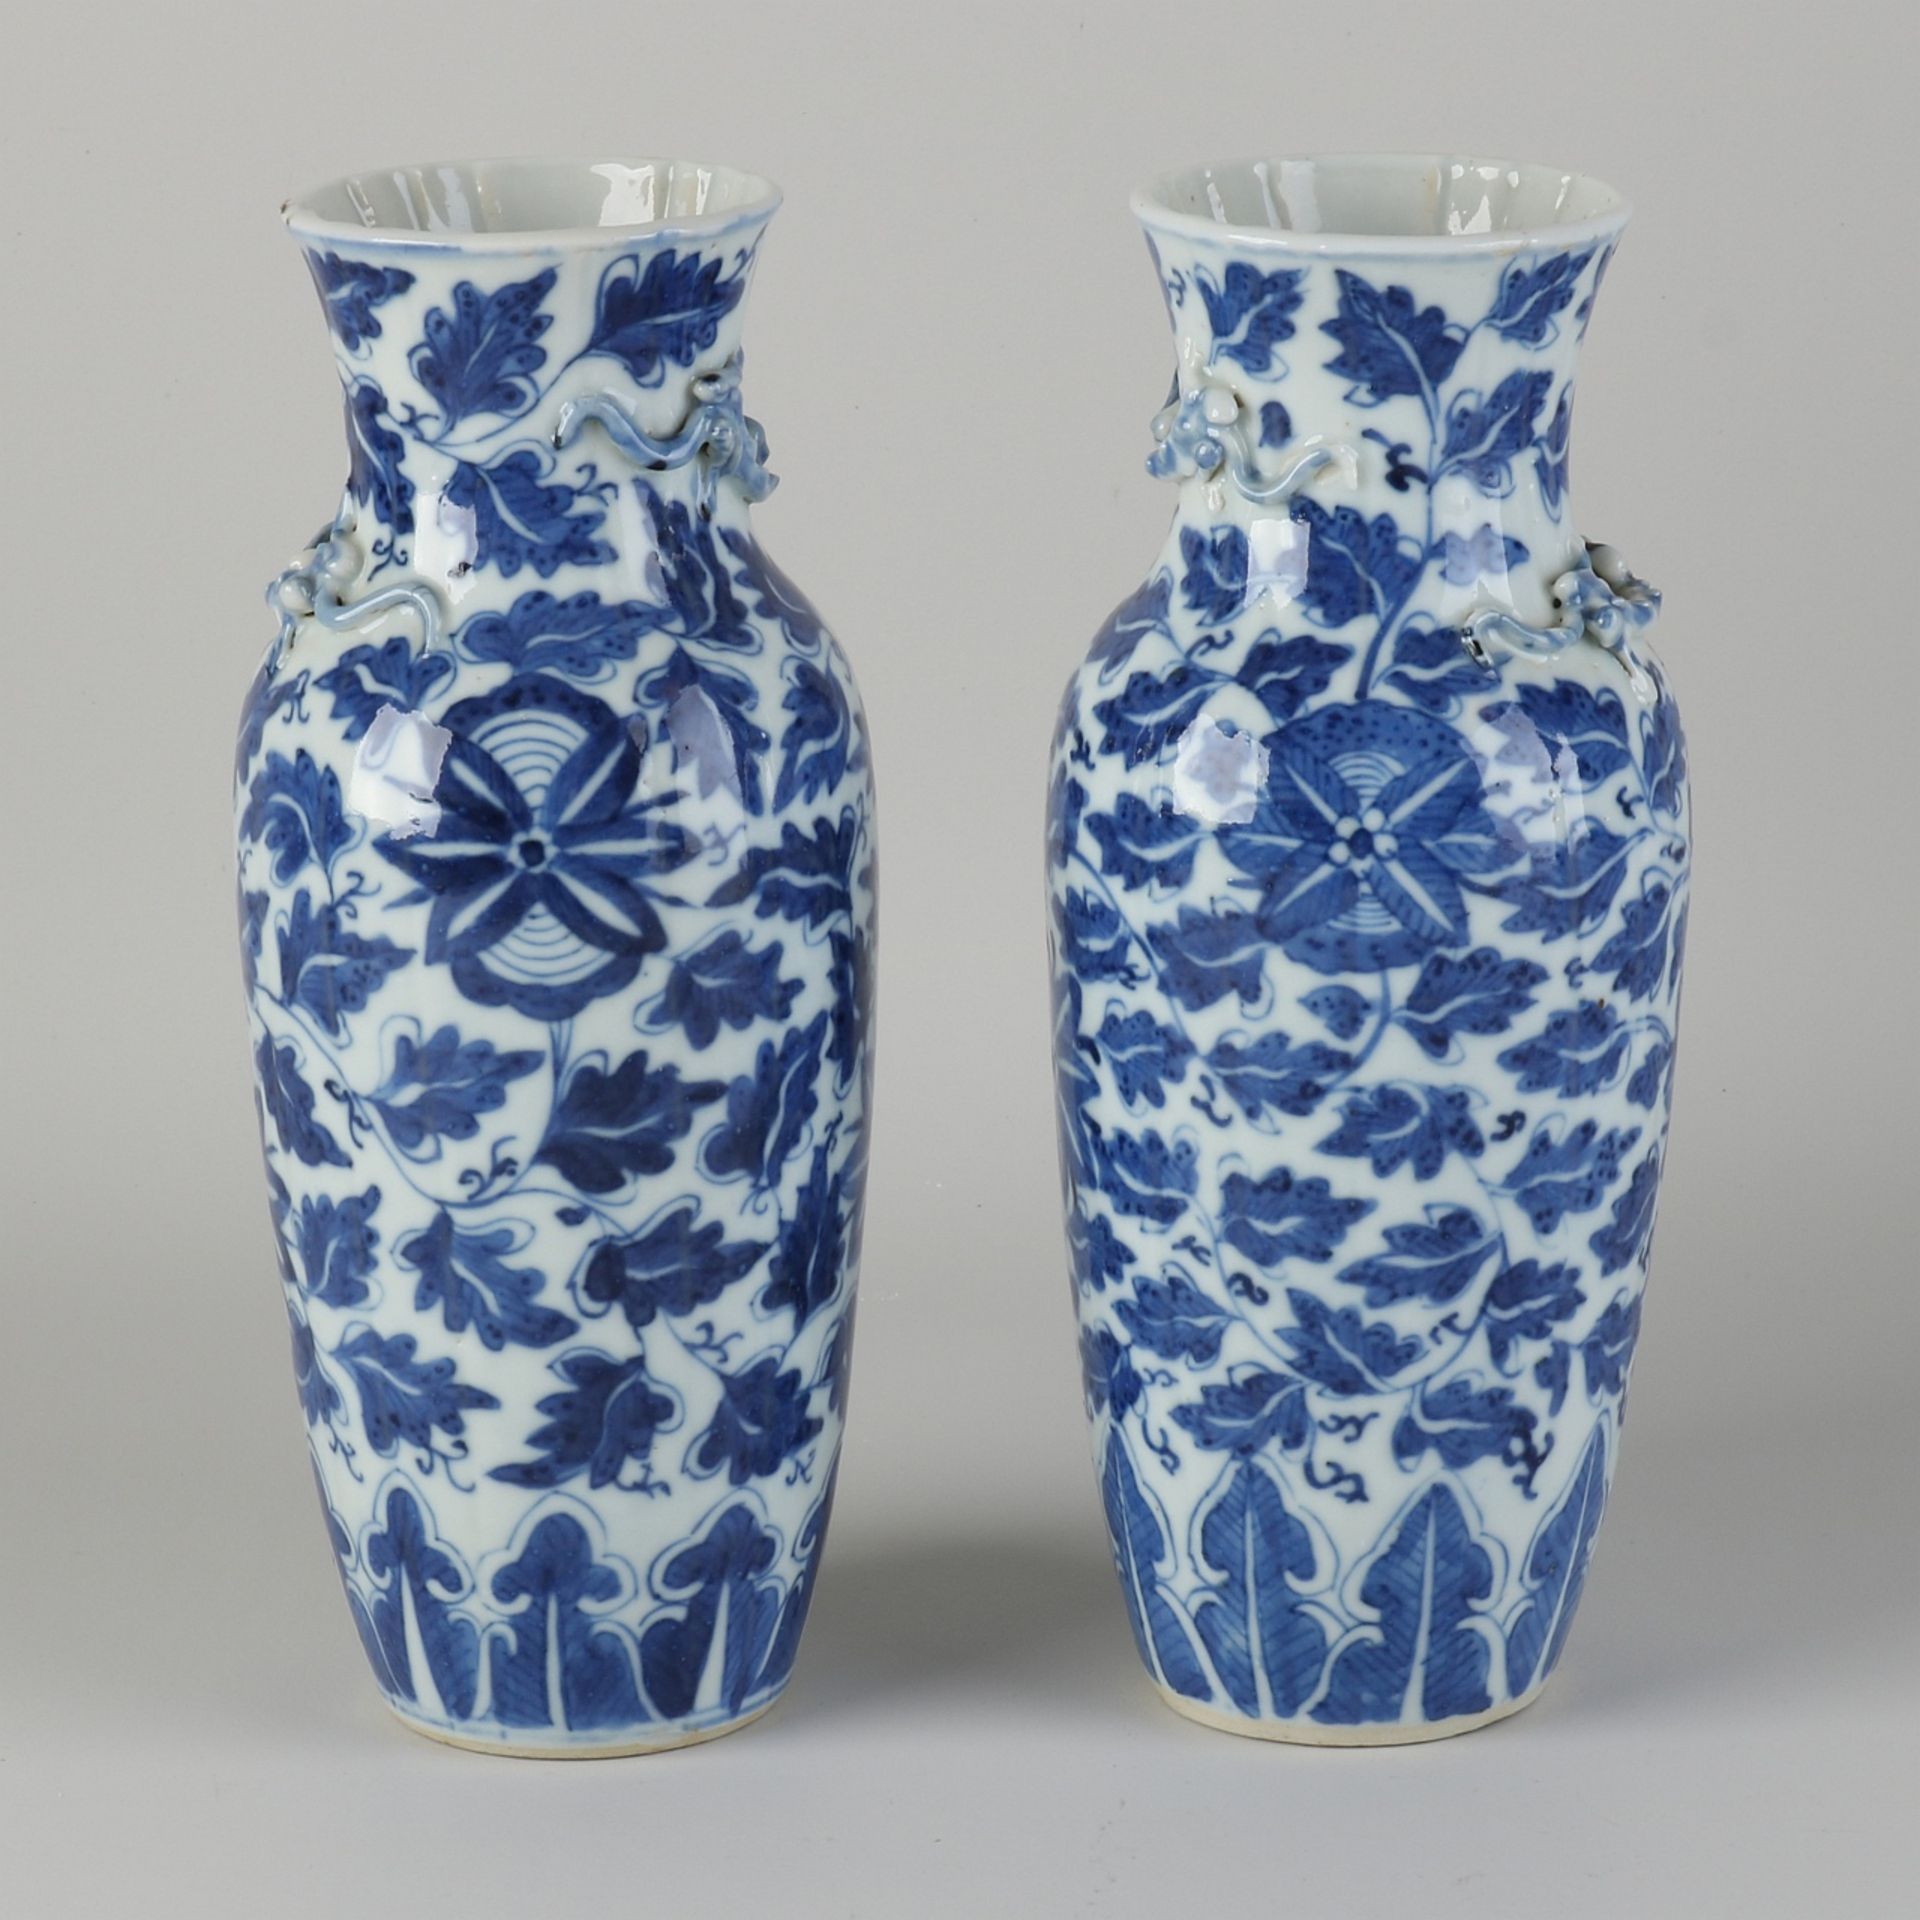 Two Chinese vases - Image 2 of 3